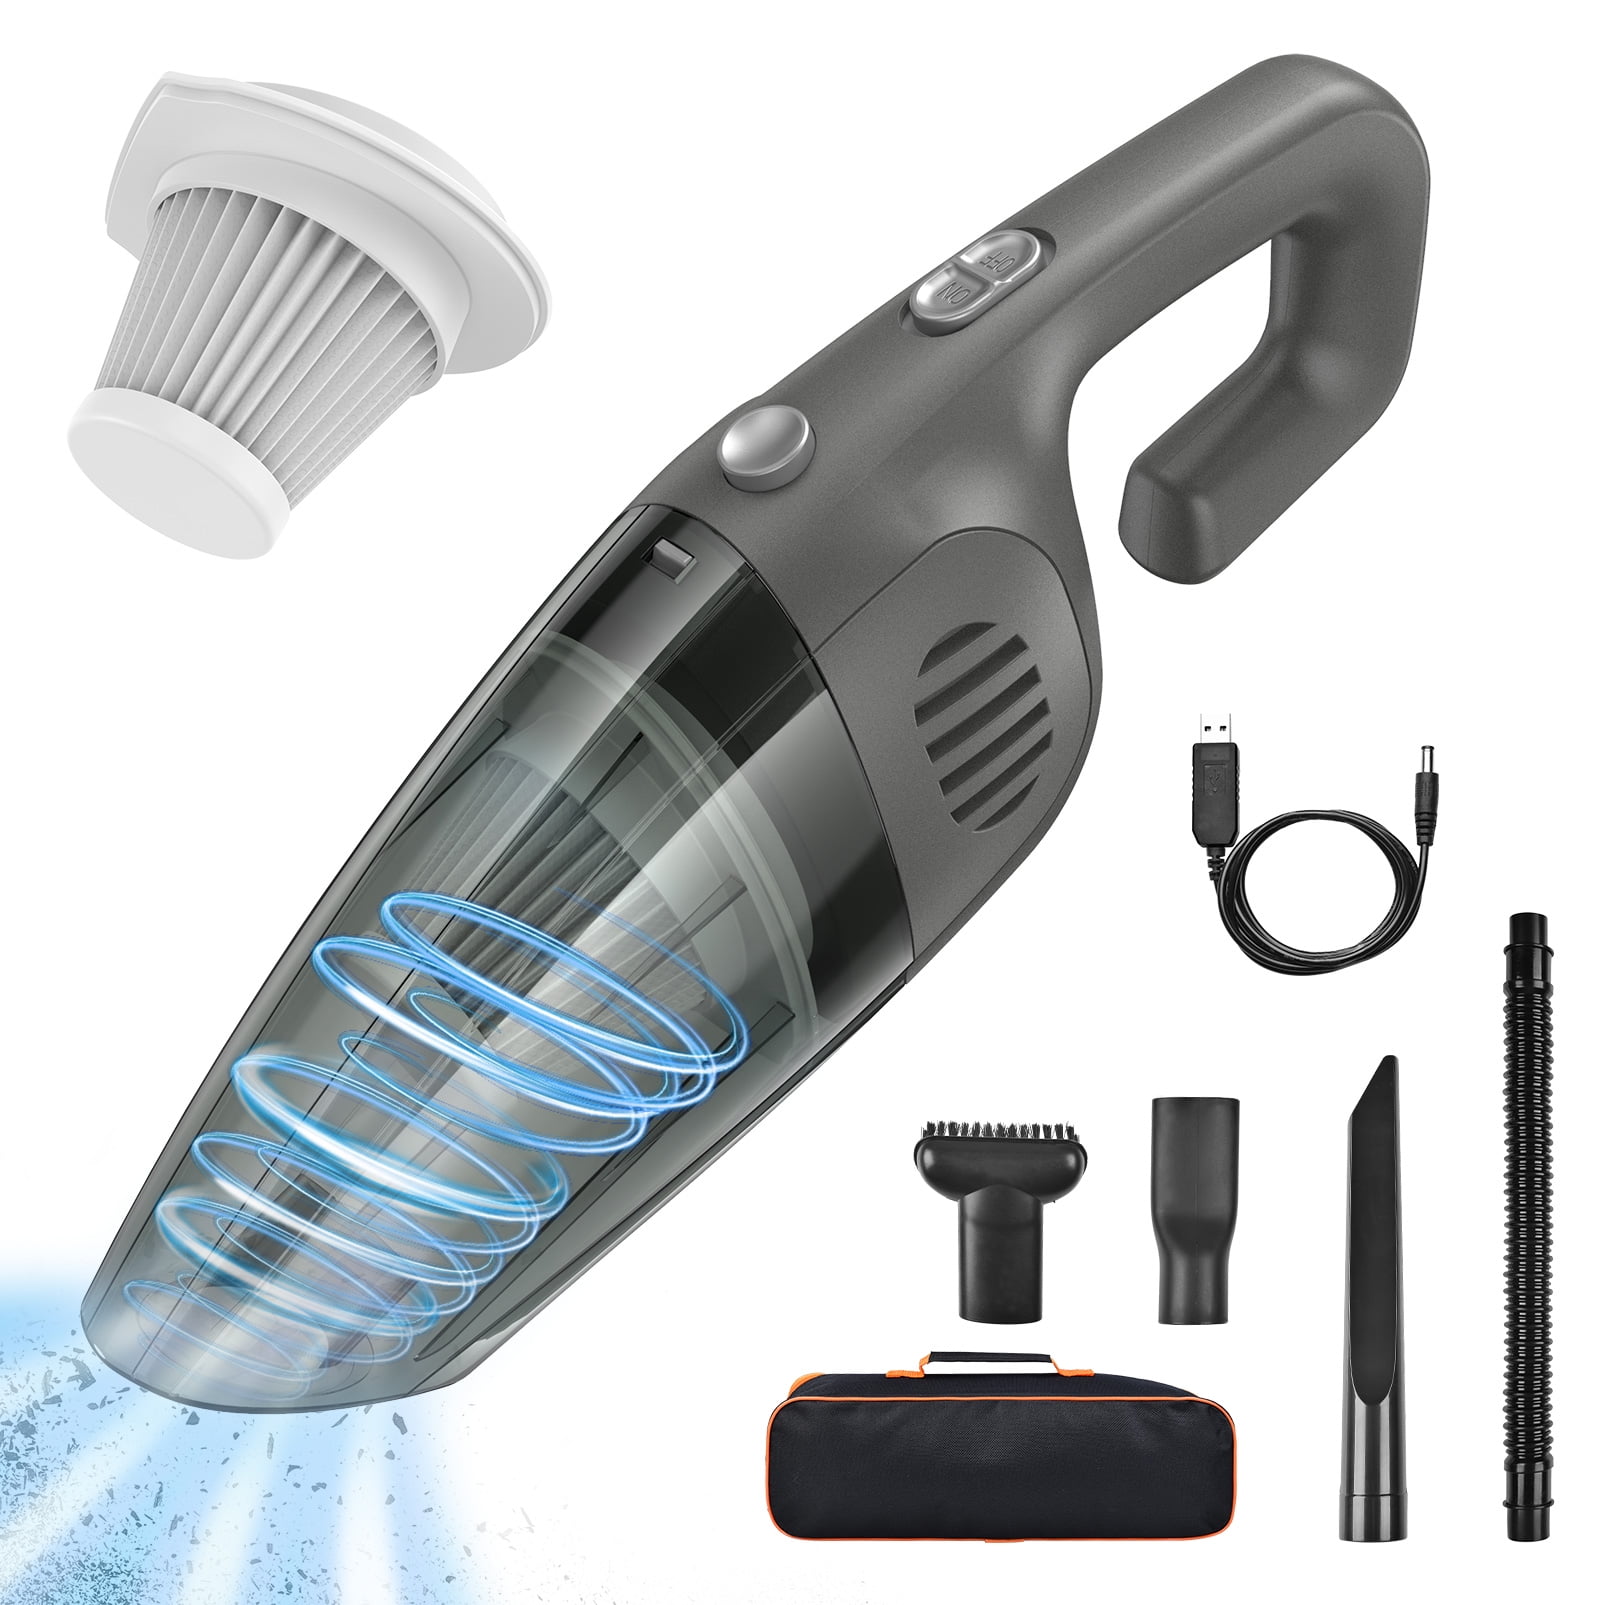 LEISURE DIRECT 12v Car Van Vacuum Cleaner Wet Dry Suction Powerful Handheld Dust Cleaning 100W